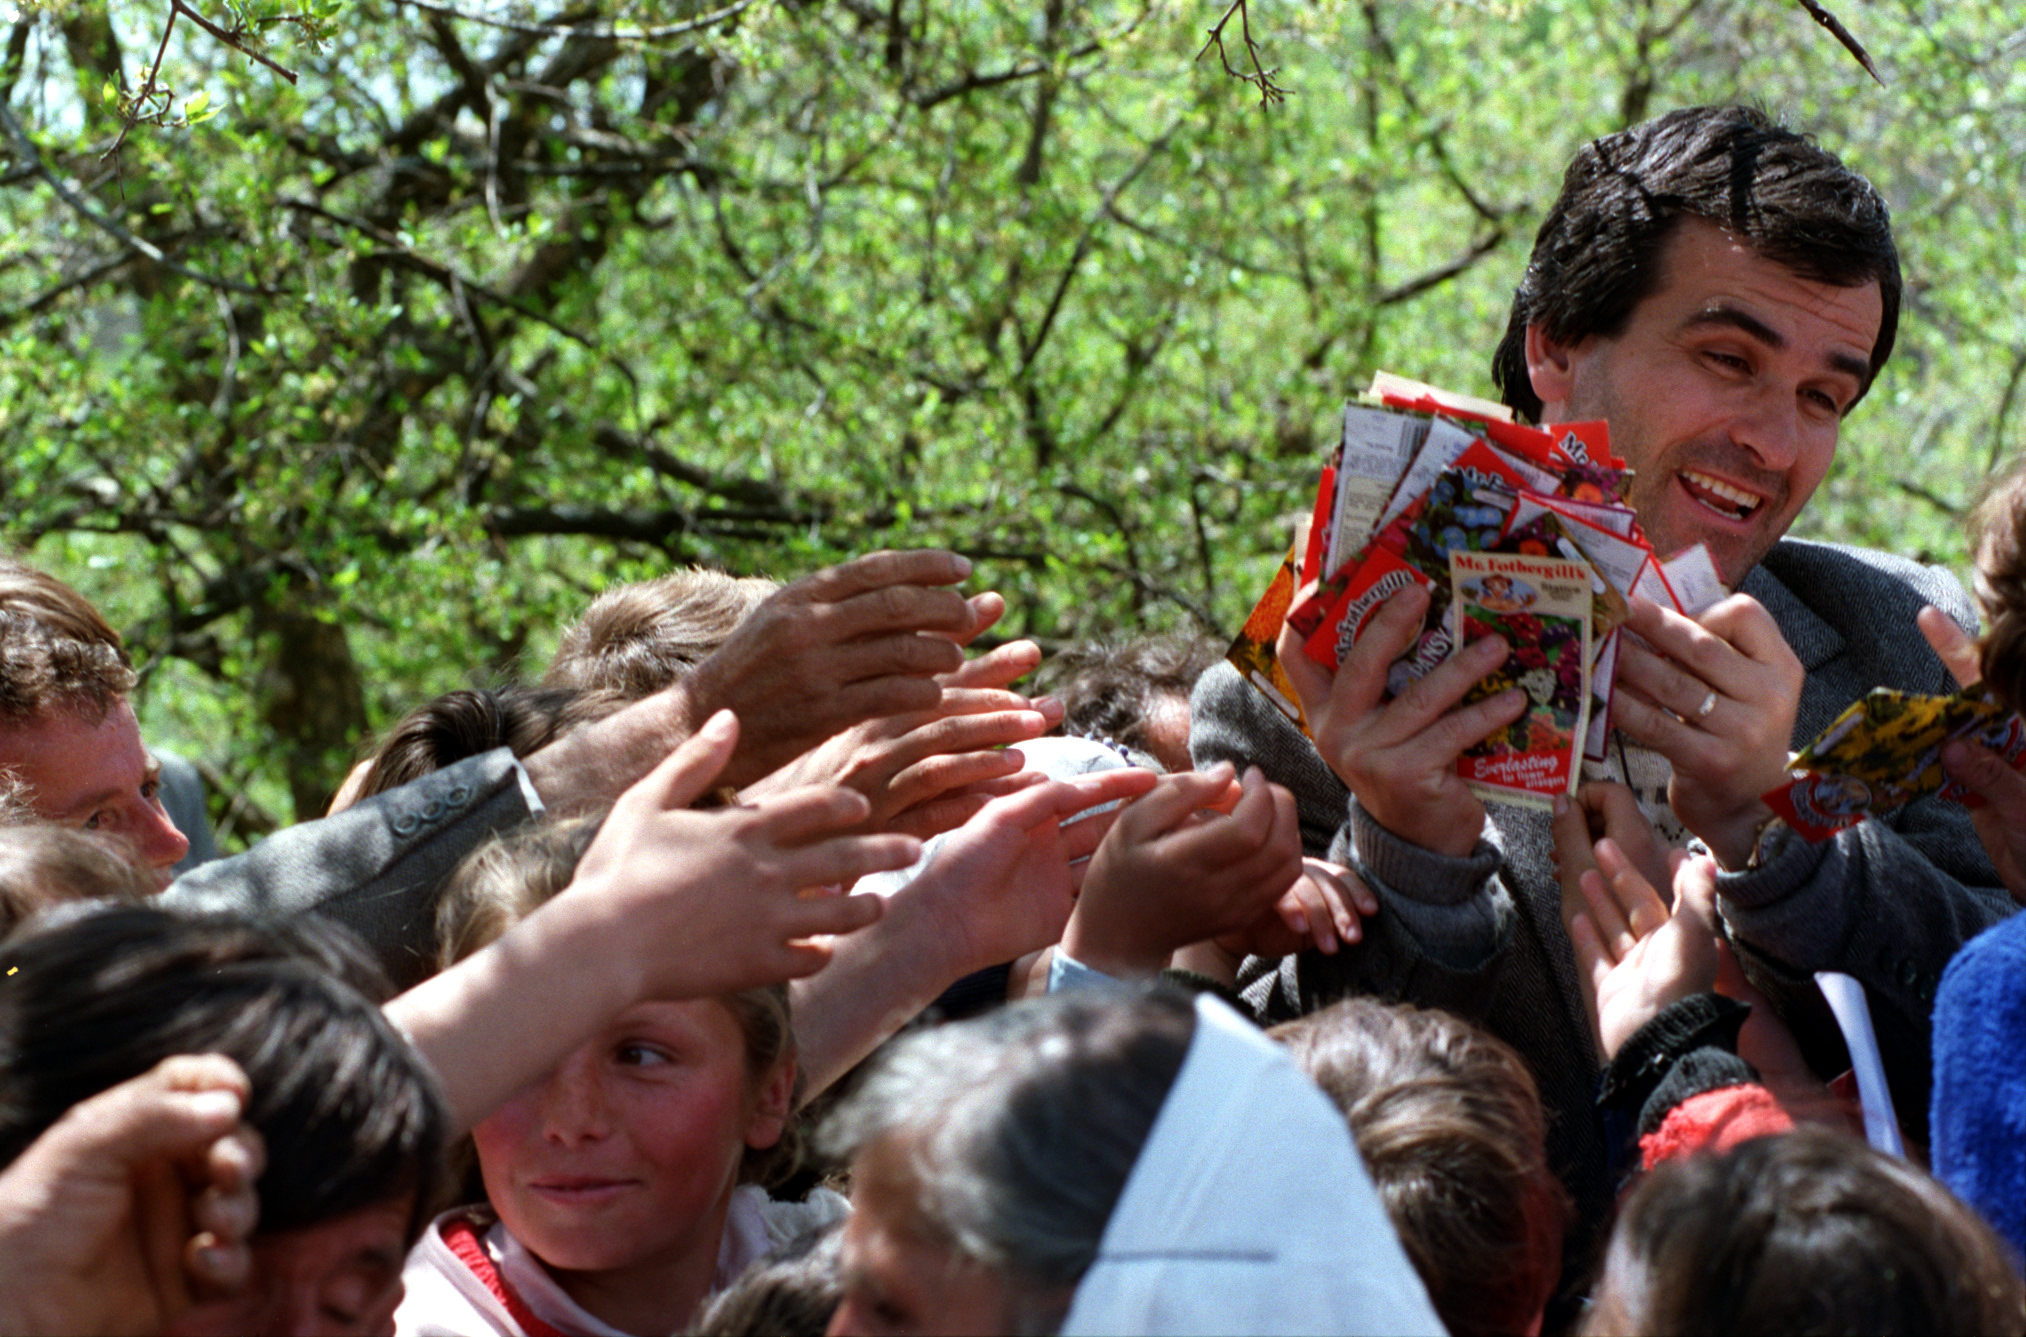  Artan Kosti, Father Martin Ritsi's assistant, hands out flower seed packets to enthusiastic villagers of Jeronisht. ©Gail Fisher Los Angeles Times 